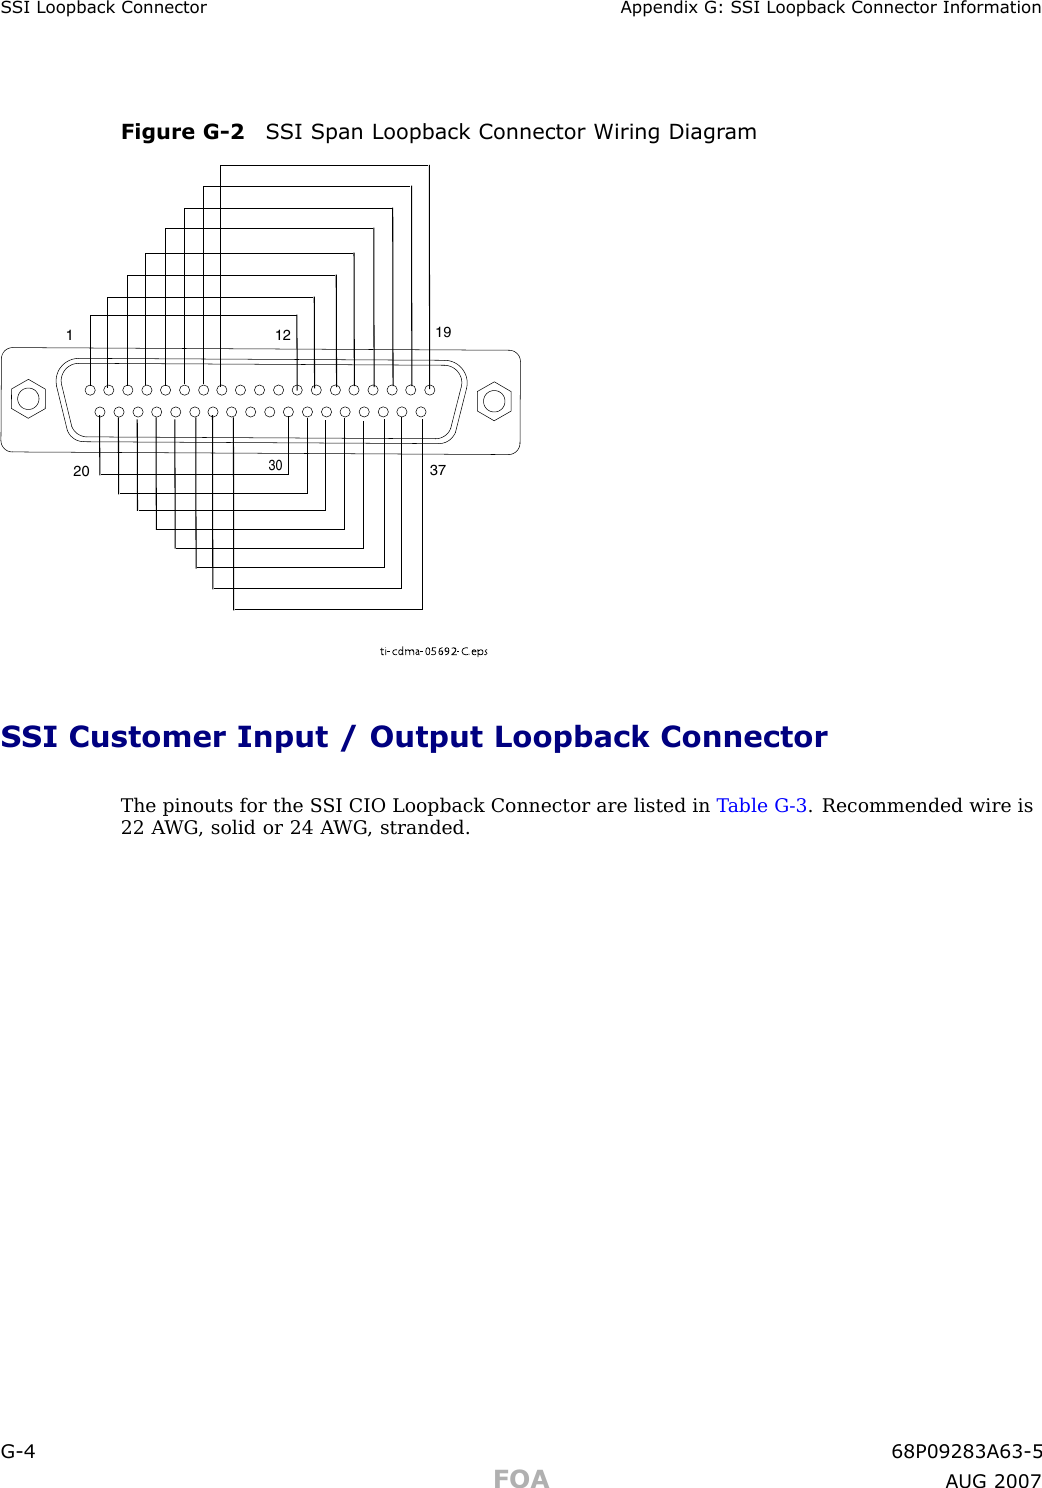 S SI Loopback Connector Appendix G: S SI Loopback Connector InformationFigure G -2 S SI Span Loopback Connector Wiring Diagr amti-cdma-05692-C.eps20 371913012SSI Customer Input / Output Loopback ConnectorThe pinouts for the S SI CIO Loopback Connector are listed in T able G -3 . Recommended wire is22 A WG , solid or 24 A WG , stranded.G -4 68P09283A63 -5FOA A UG 2007